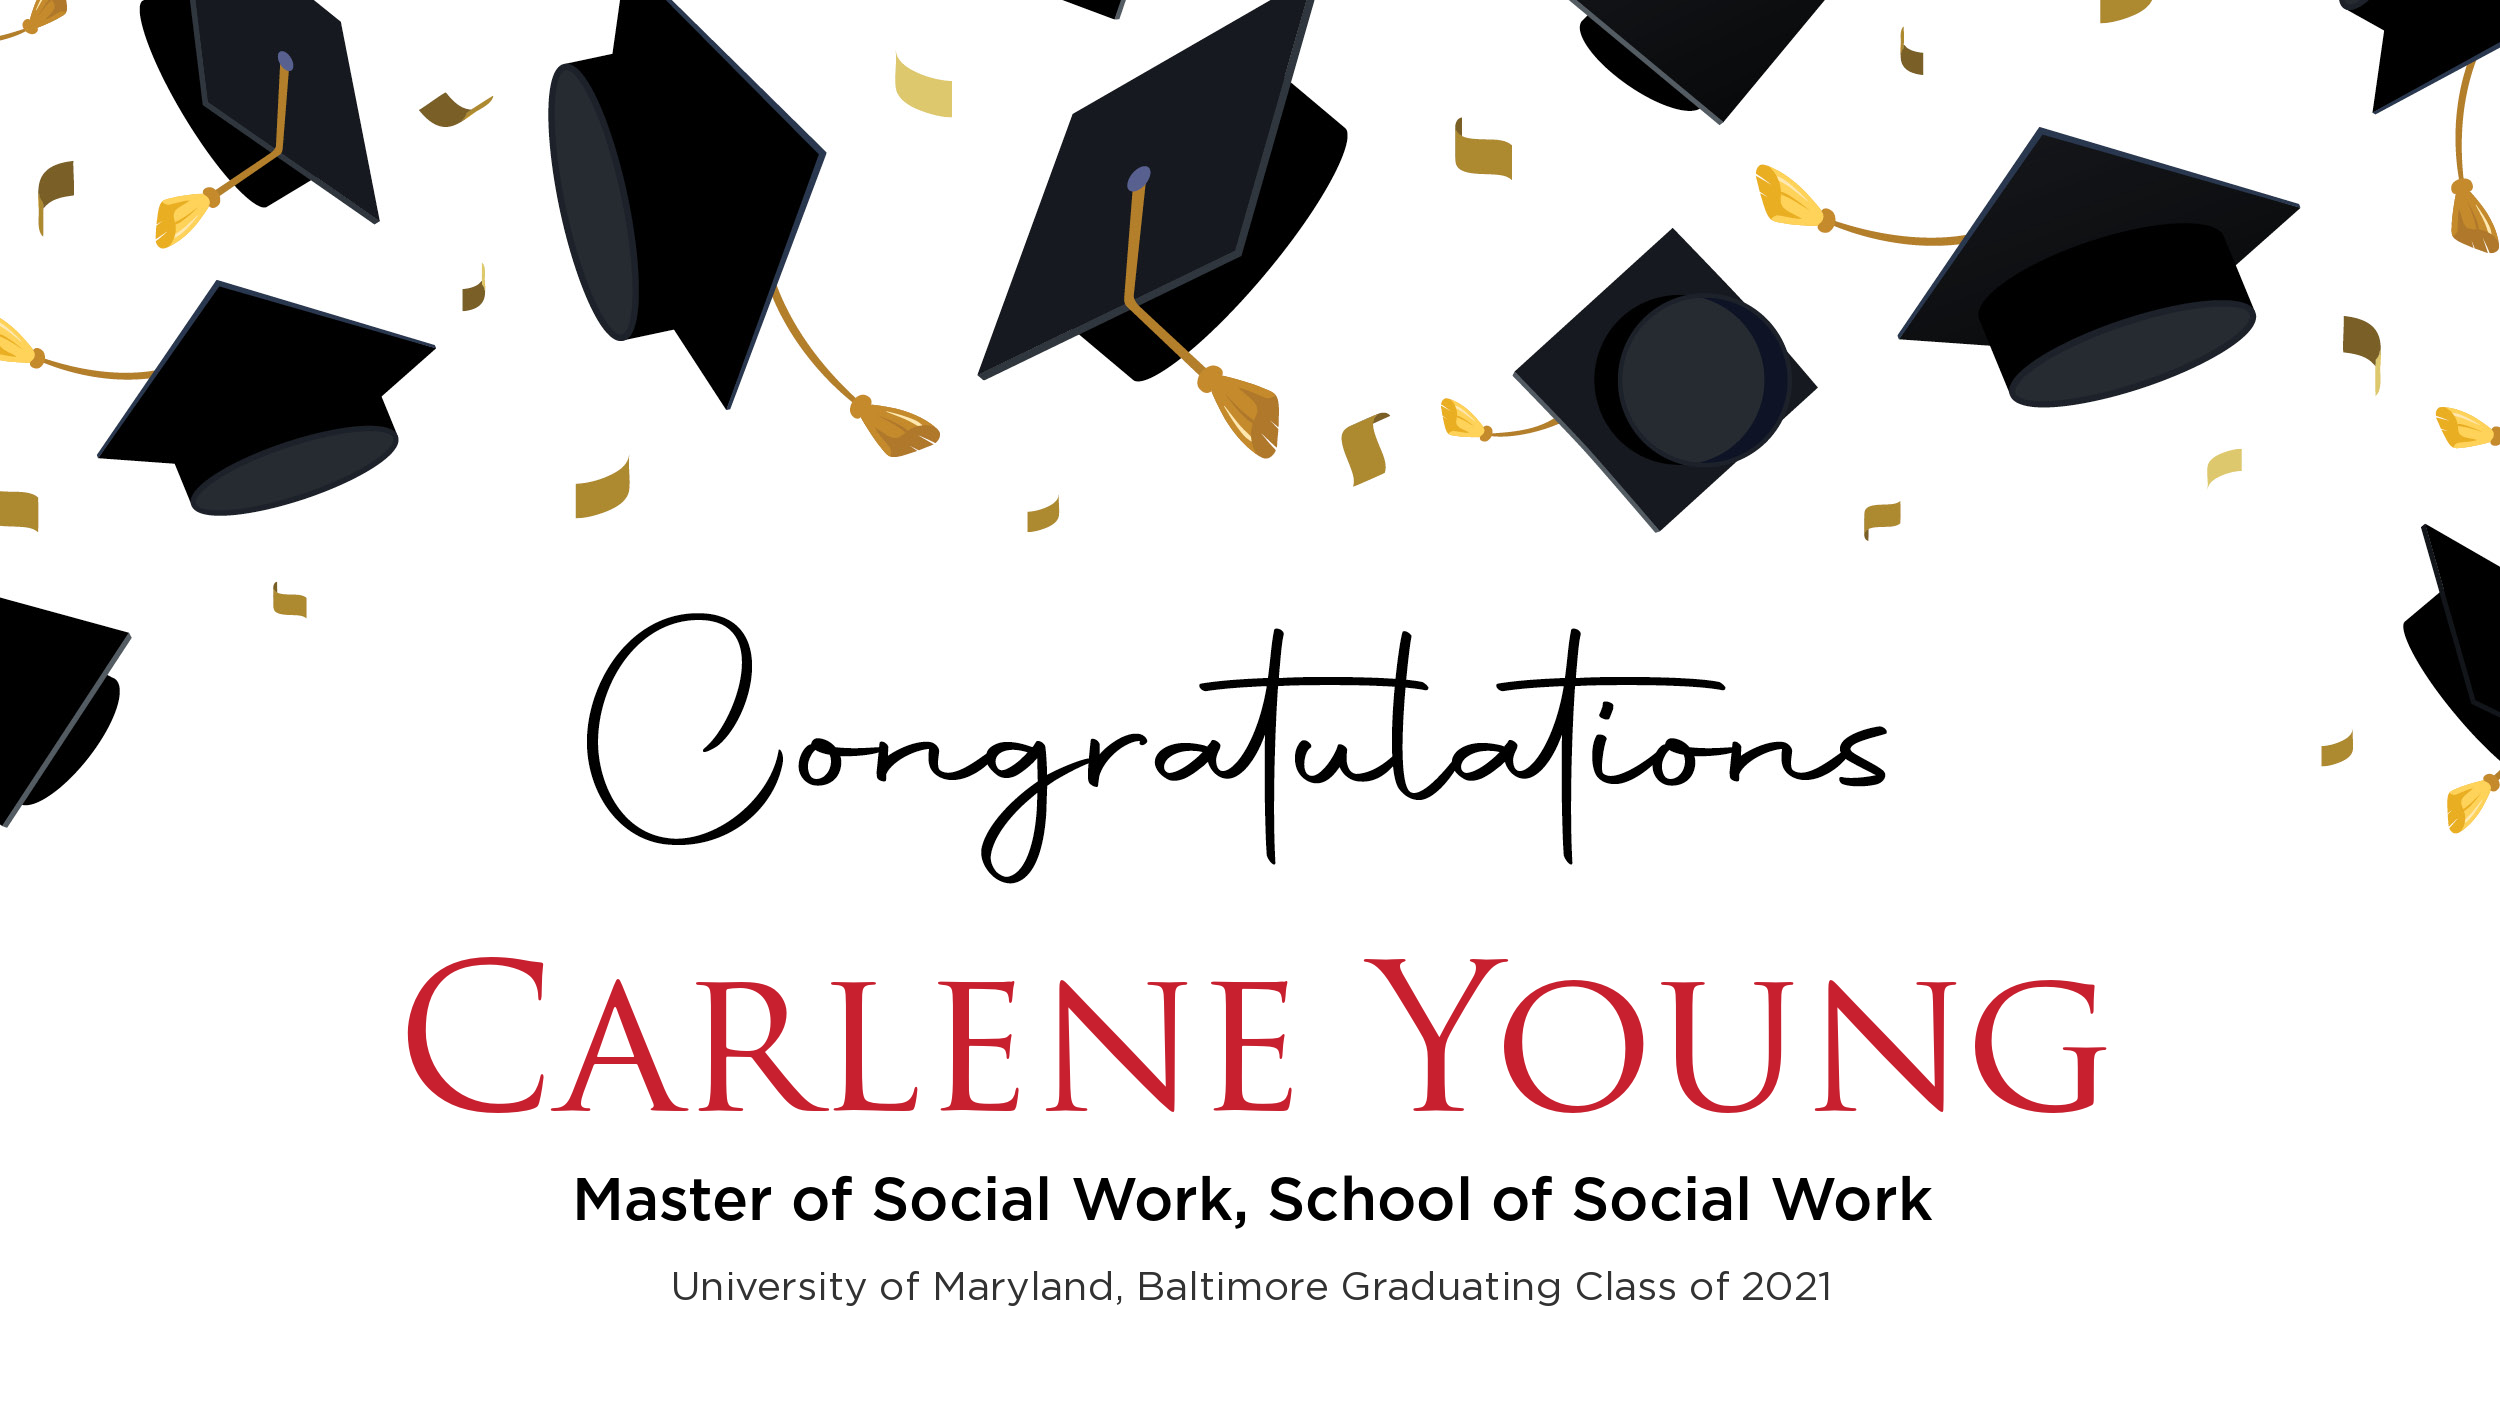 Congratulations Carlene Young, Master of Social Work